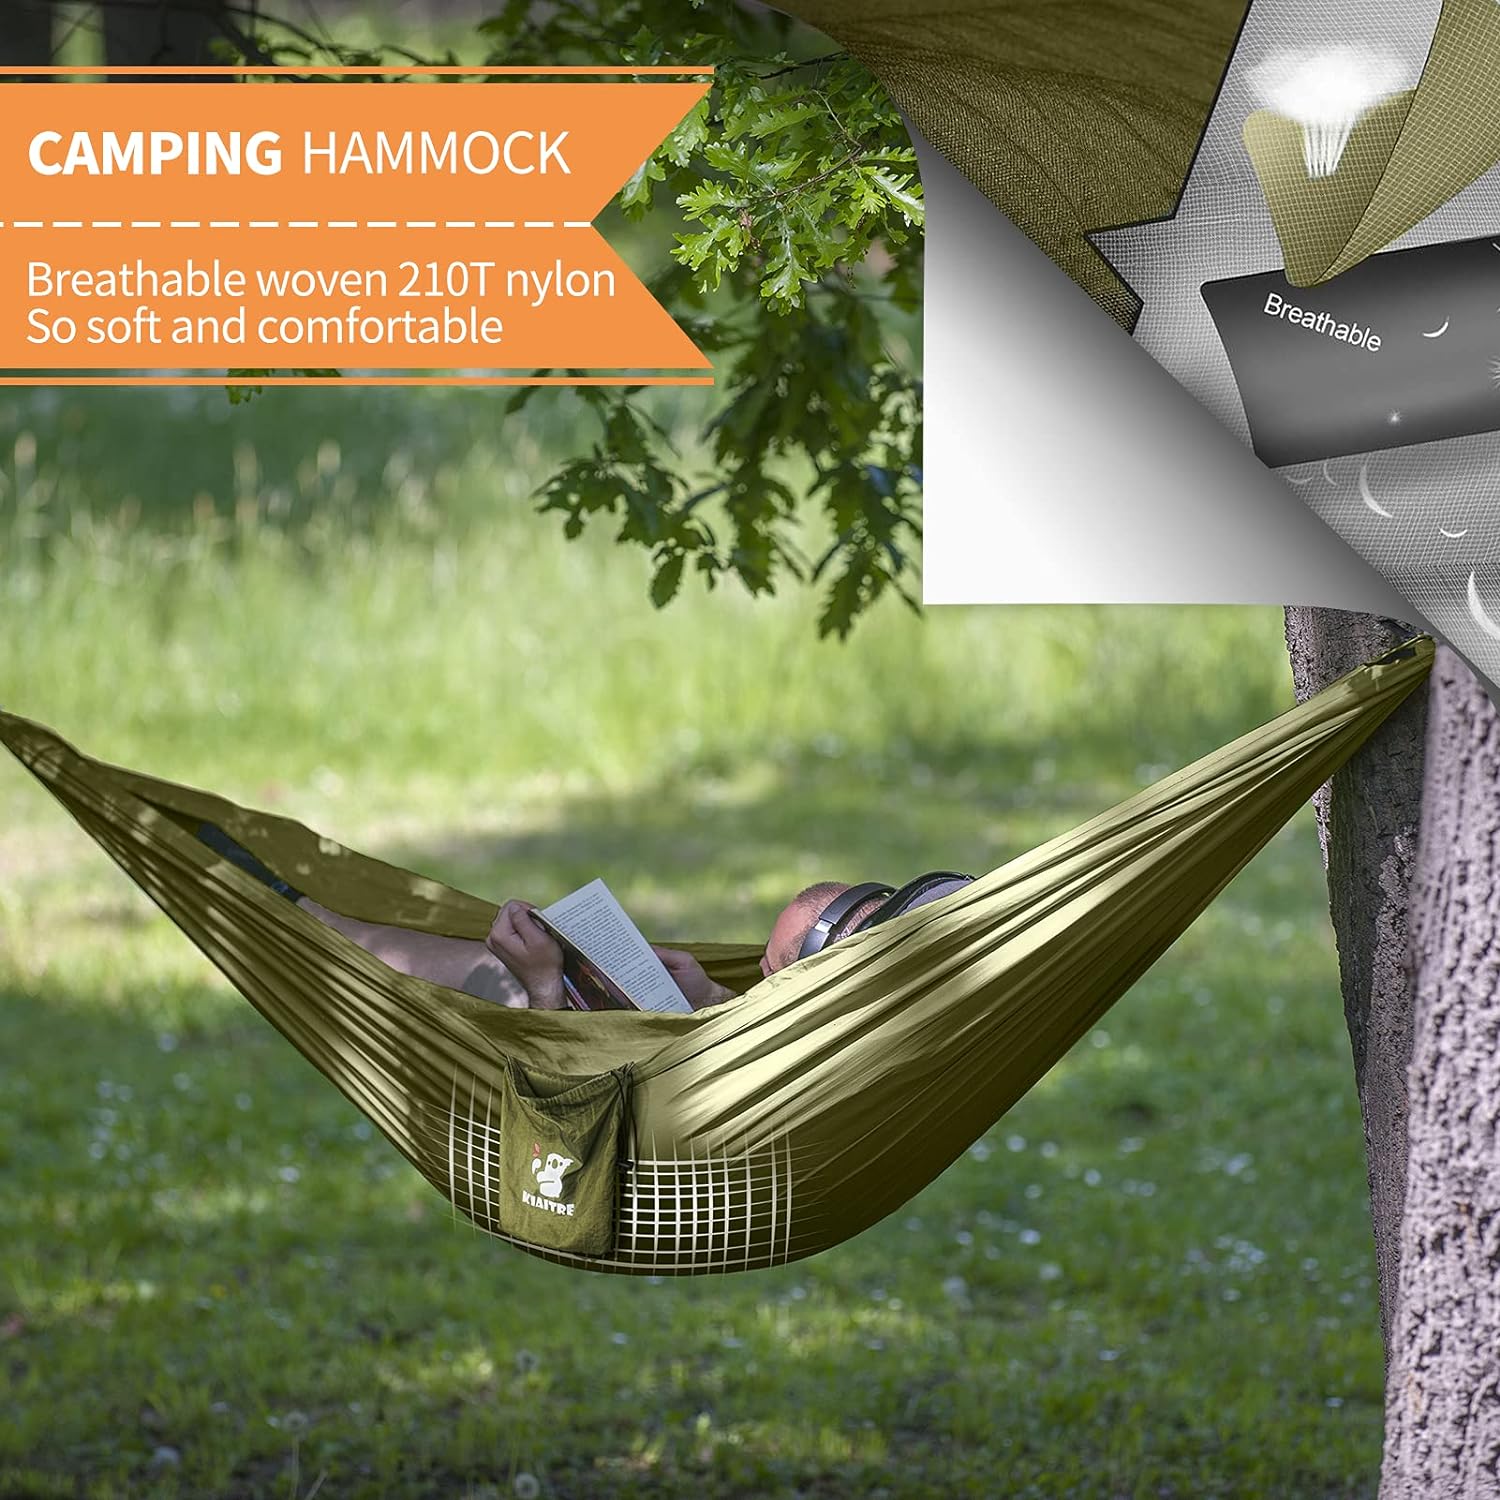 Kiaitre Camping Hammock with Mosquito Net - 210T Quick-drying Parachute Nylon Lightweight Portable Travel Hammock for Outdoor, Backpacking, Camping, Hiking and Beach Adventure : Amazon.co.uk: Sports  Outdoors